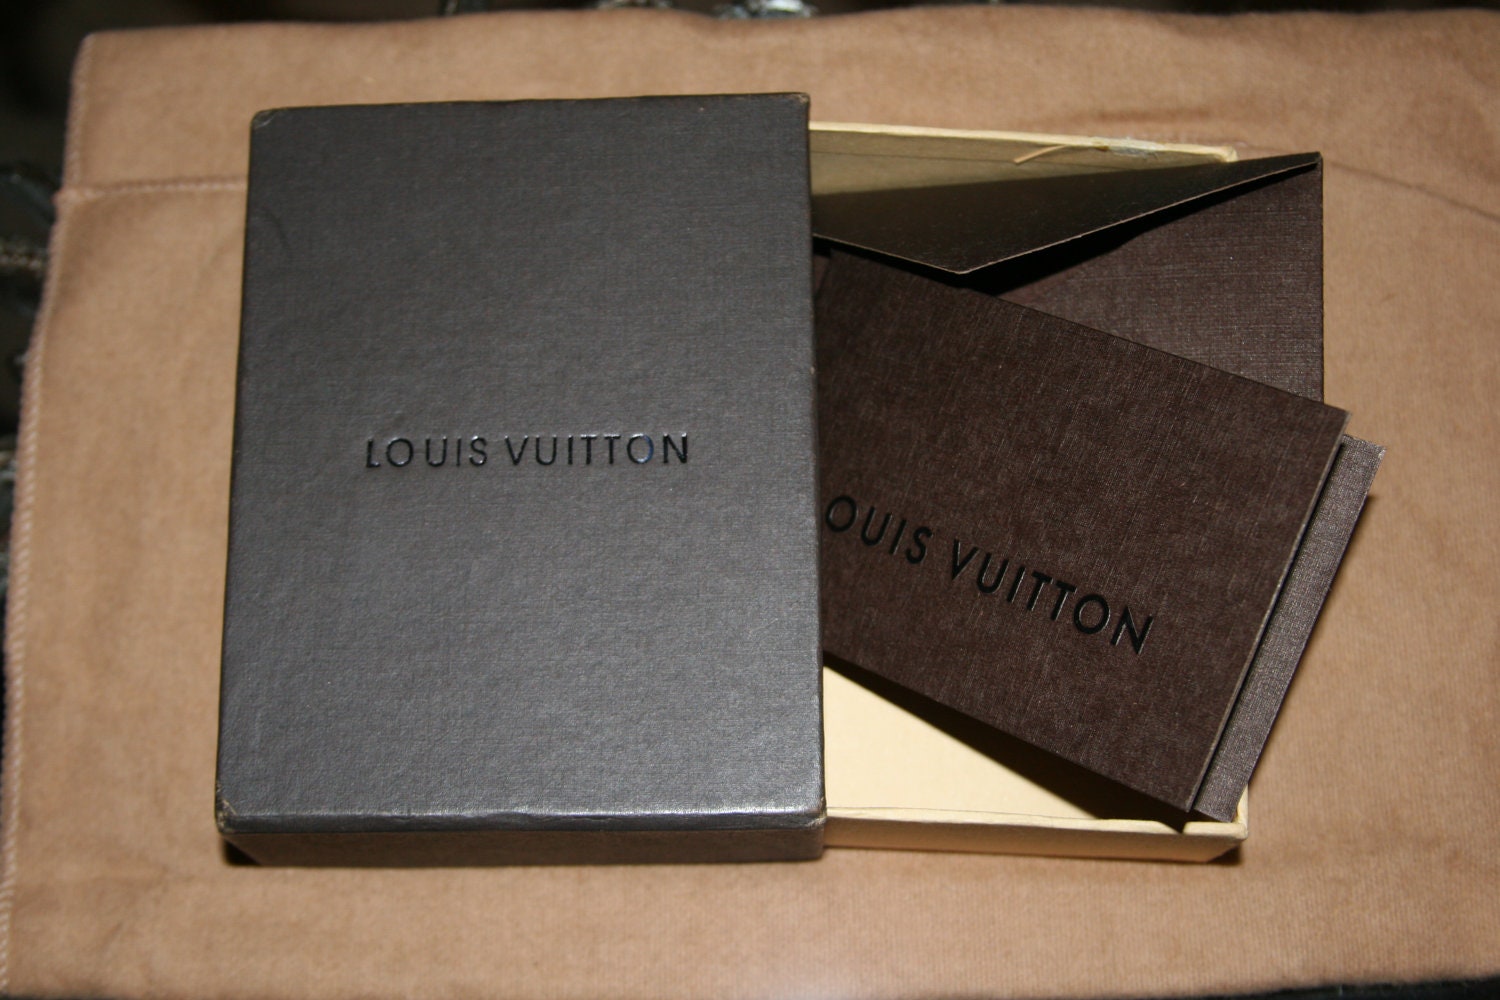 Louis Vuitton gift box with gift card and by Bagsshoesandmore